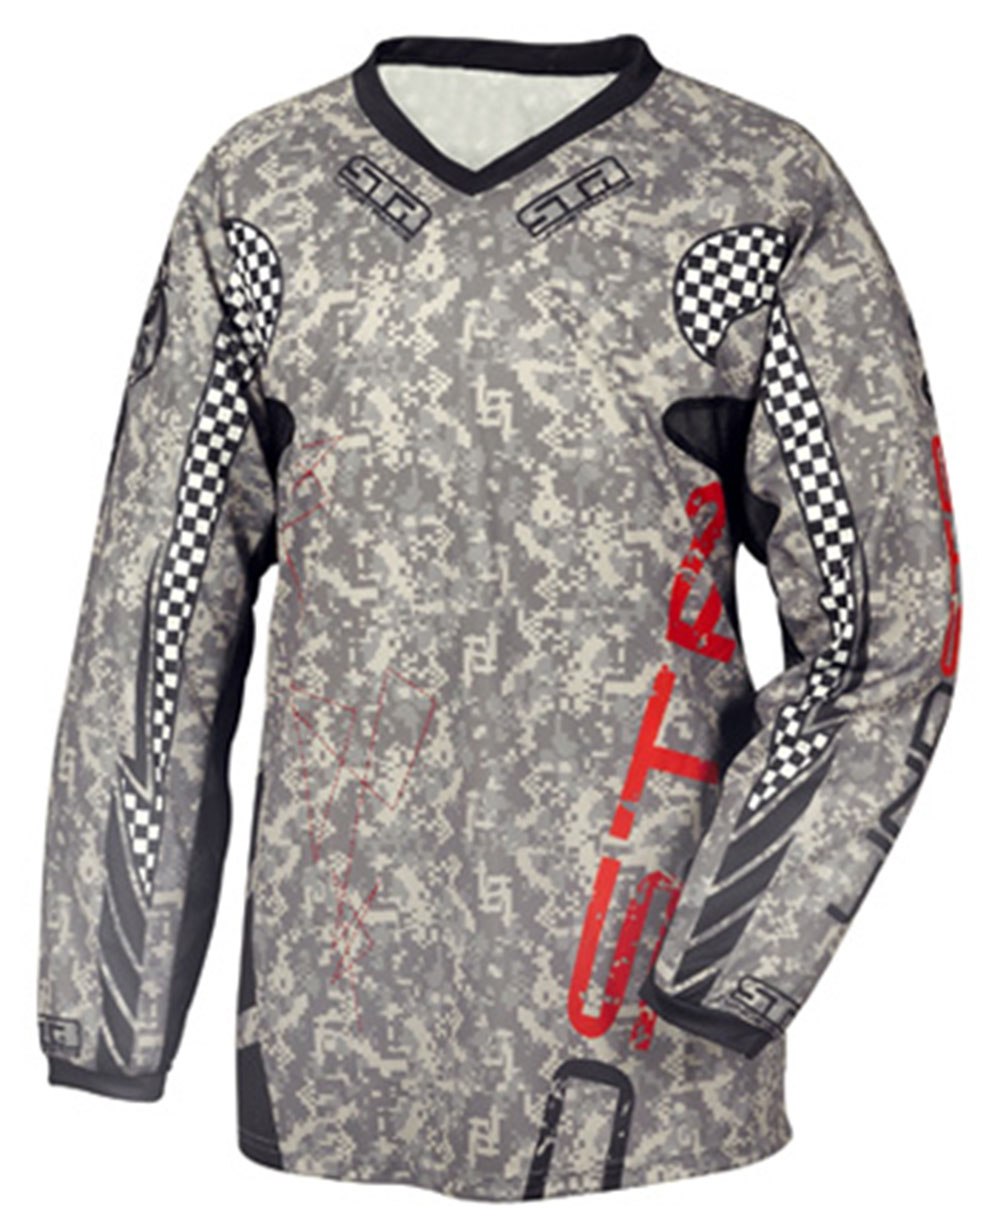 LINDSTRANDS WHIP MX MOTOCROSS SHIRT JERSEY GREEN PIXEL CHEAP SALE CLEARANCE - Picture 1 of 1